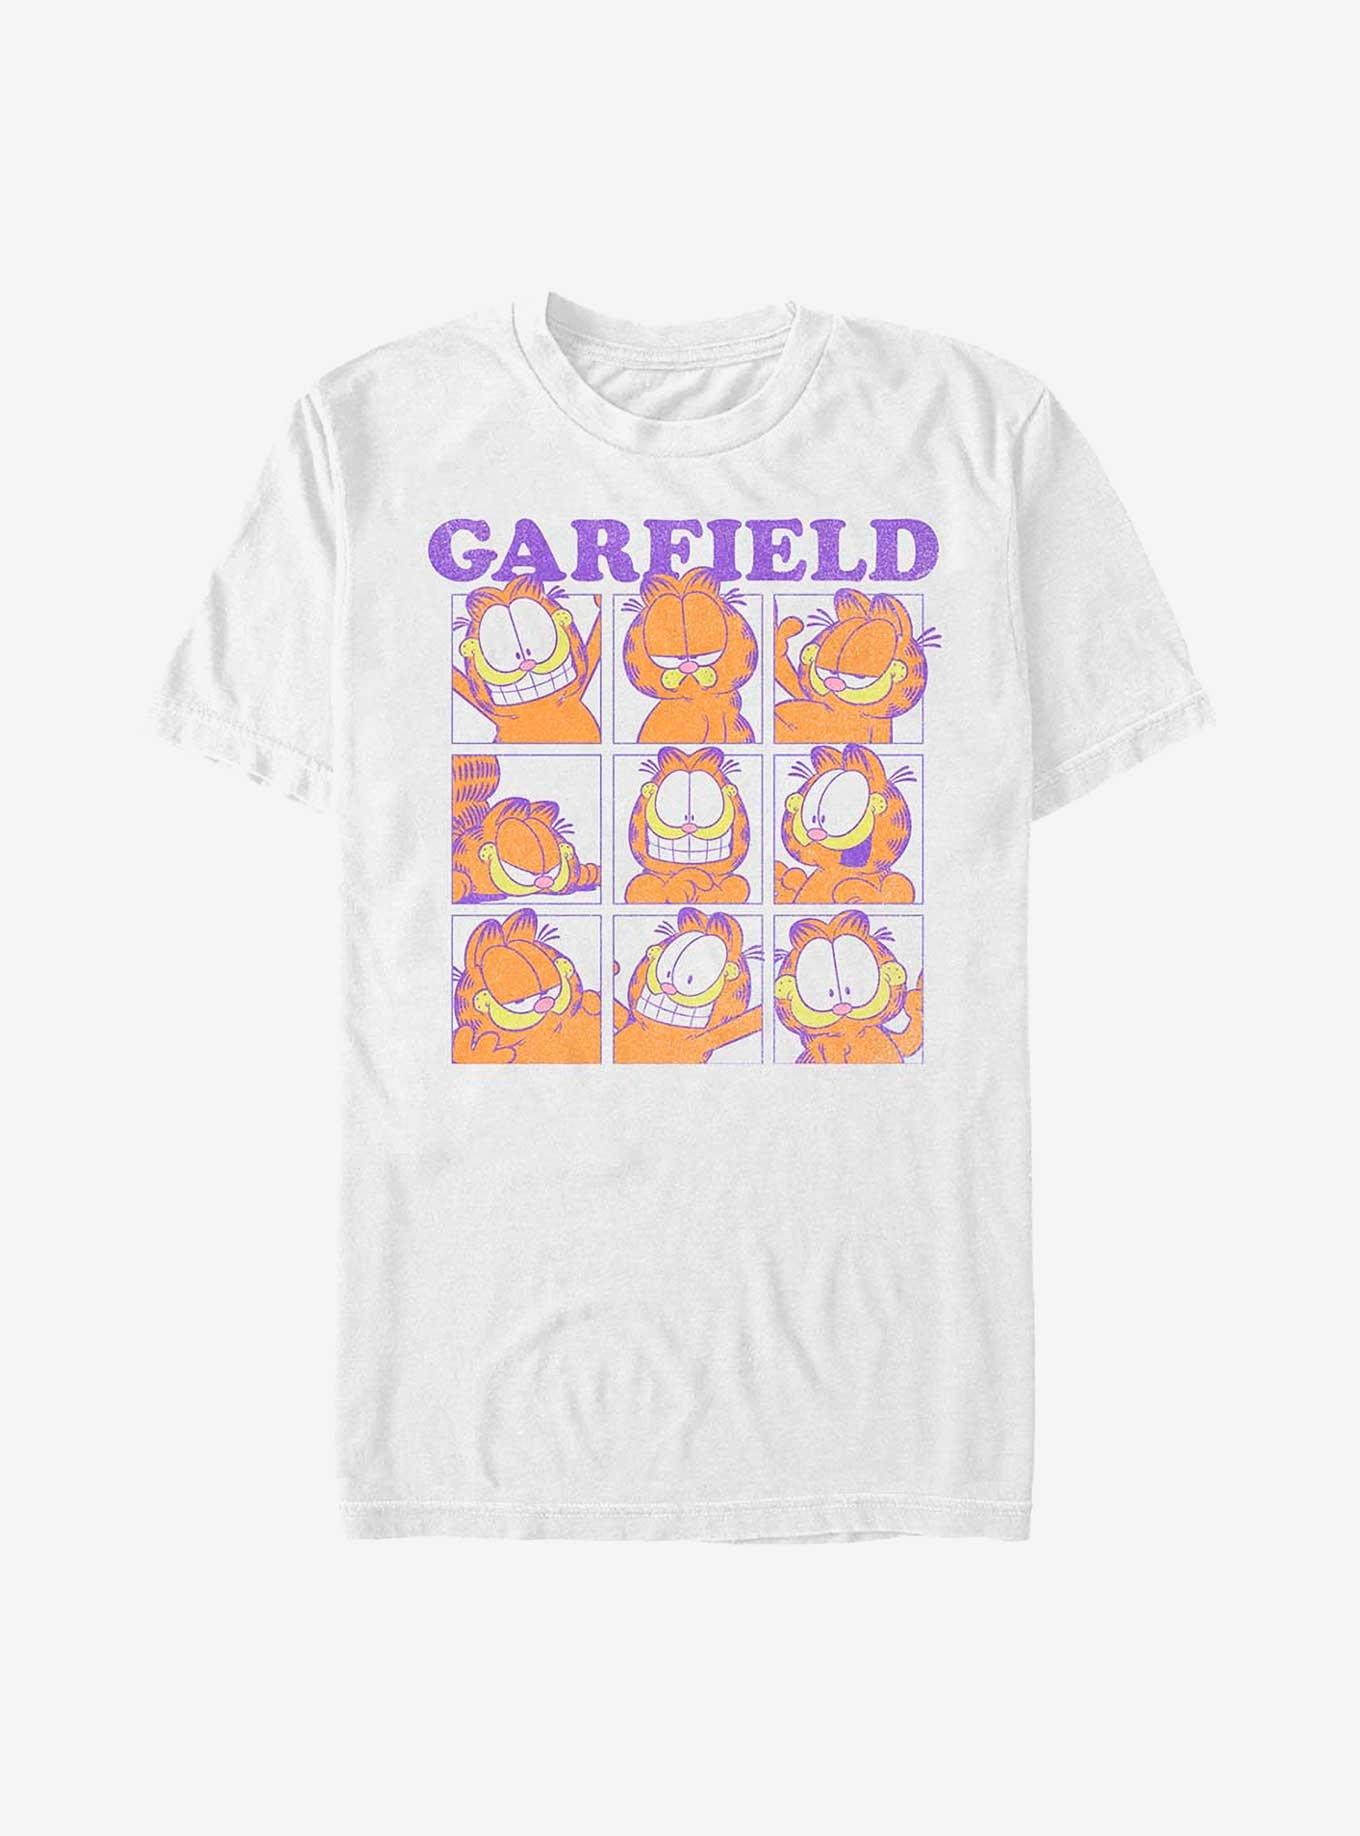 Garfield Many Faces of T-Shirt